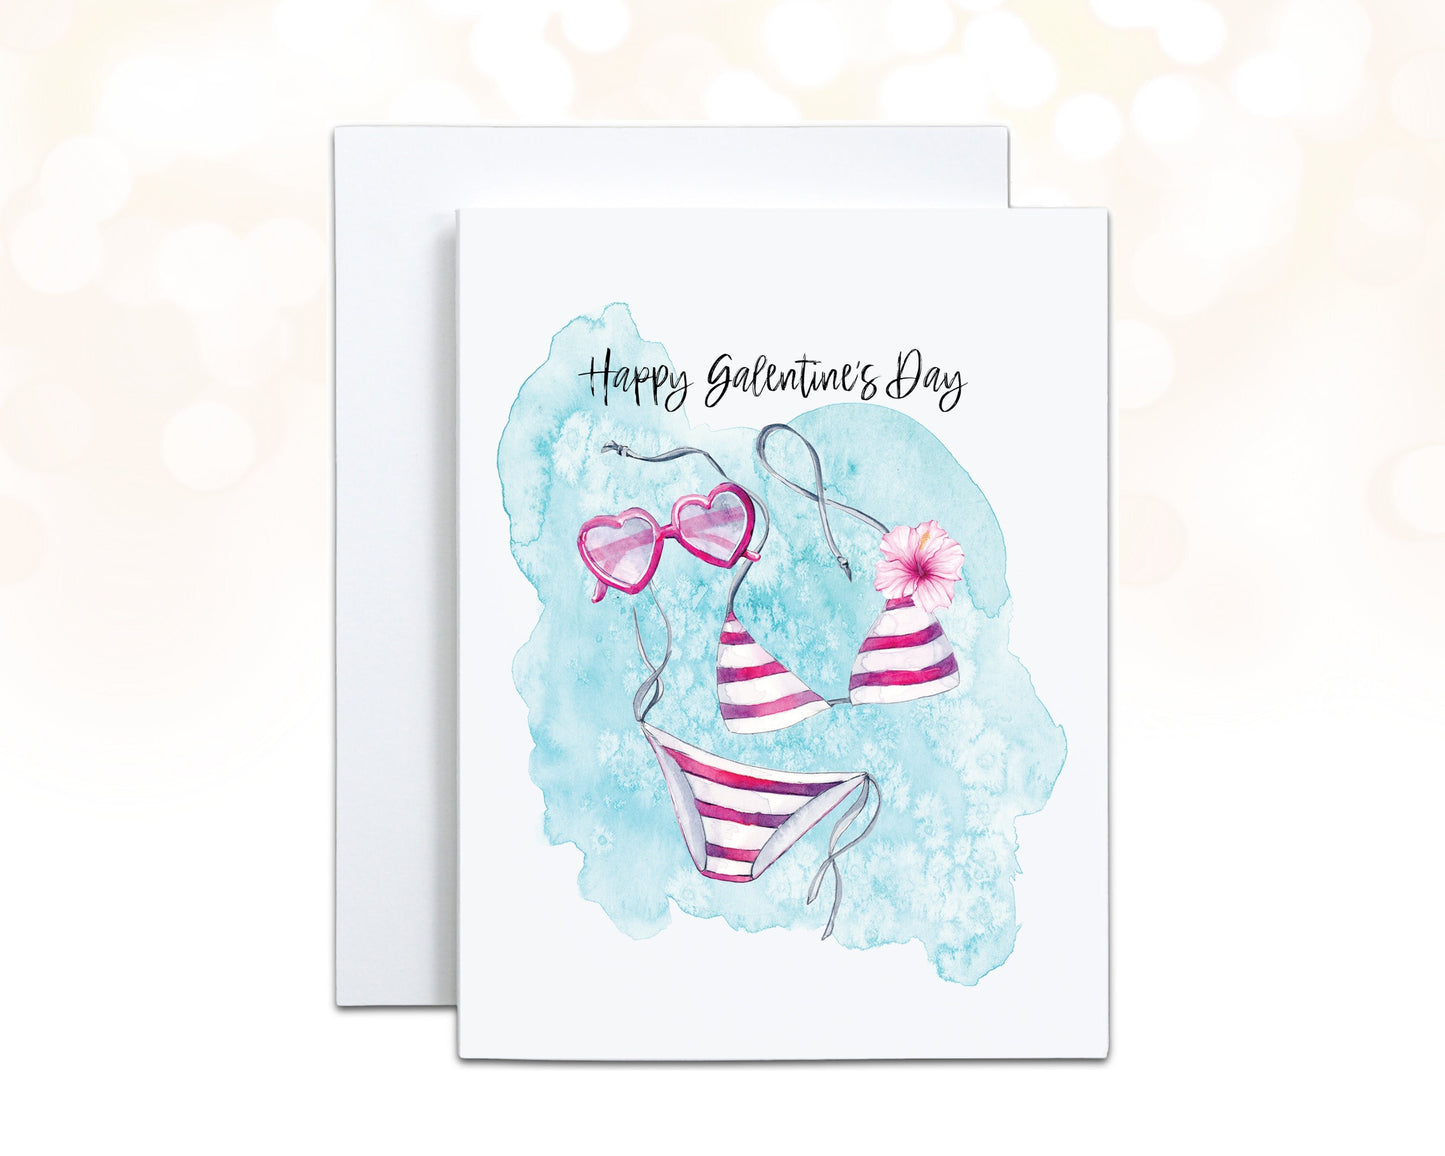 Happy Galentines Day Valentine Card for Best Friend, Bikini Fashion Illustration, Heart Glasses Friendship Card for Her, Personalized Card